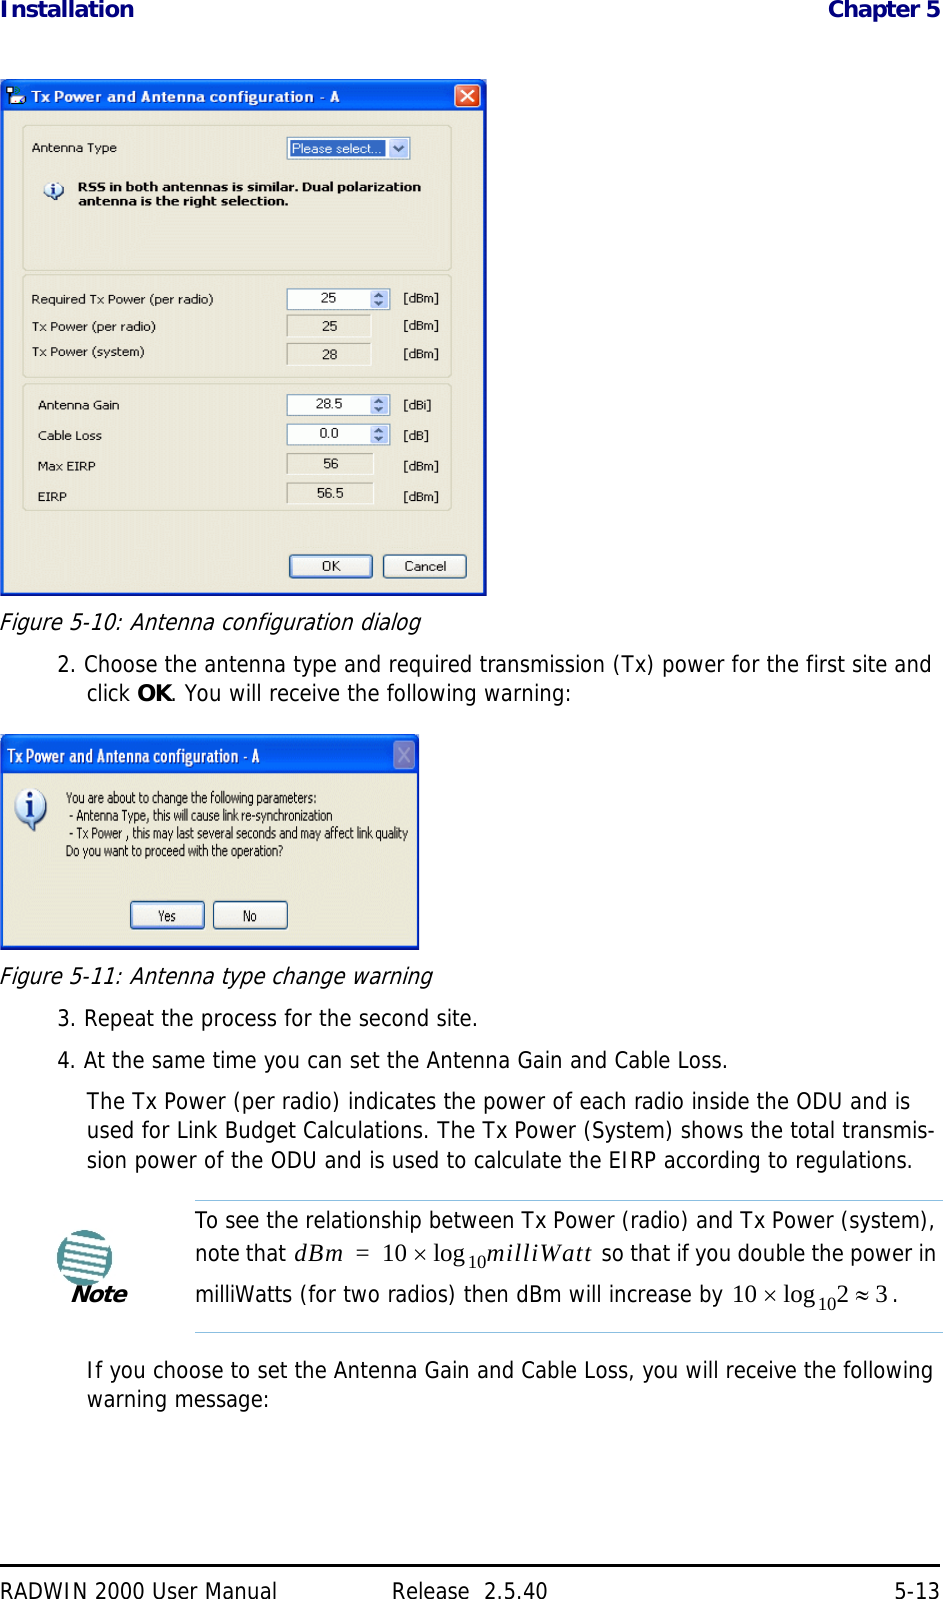 Installation Chapter 5RADWIN 2000 User Manual Release  2.5.40 5-13Figure 5-10: Antenna configuration dialog2. Choose the antenna type and required transmission (Tx) power for the first site and click OK. You will receive the following warning:Figure 5-11: Antenna type change warning3. Repeat the process for the second site.4. At the same time you can set the Antenna Gain and Cable Loss.The Tx Power (per radio) indicates the power of each radio inside the ODU and is used for Link Budget Calculations. The Tx Power (System) shows the total transmis-sion power of the ODU and is used to calculate the EIRP according to regulations.If you choose to set the Antenna Gain and Cable Loss, you will receive the following warning message:NoteTo see the relationship between Tx Power (radio) and Tx Power (system), note that   so that if you double the power in milliWatts (for two radios) then dBm will increase by  .dBm 10 milliWatt10log=10 2 310log